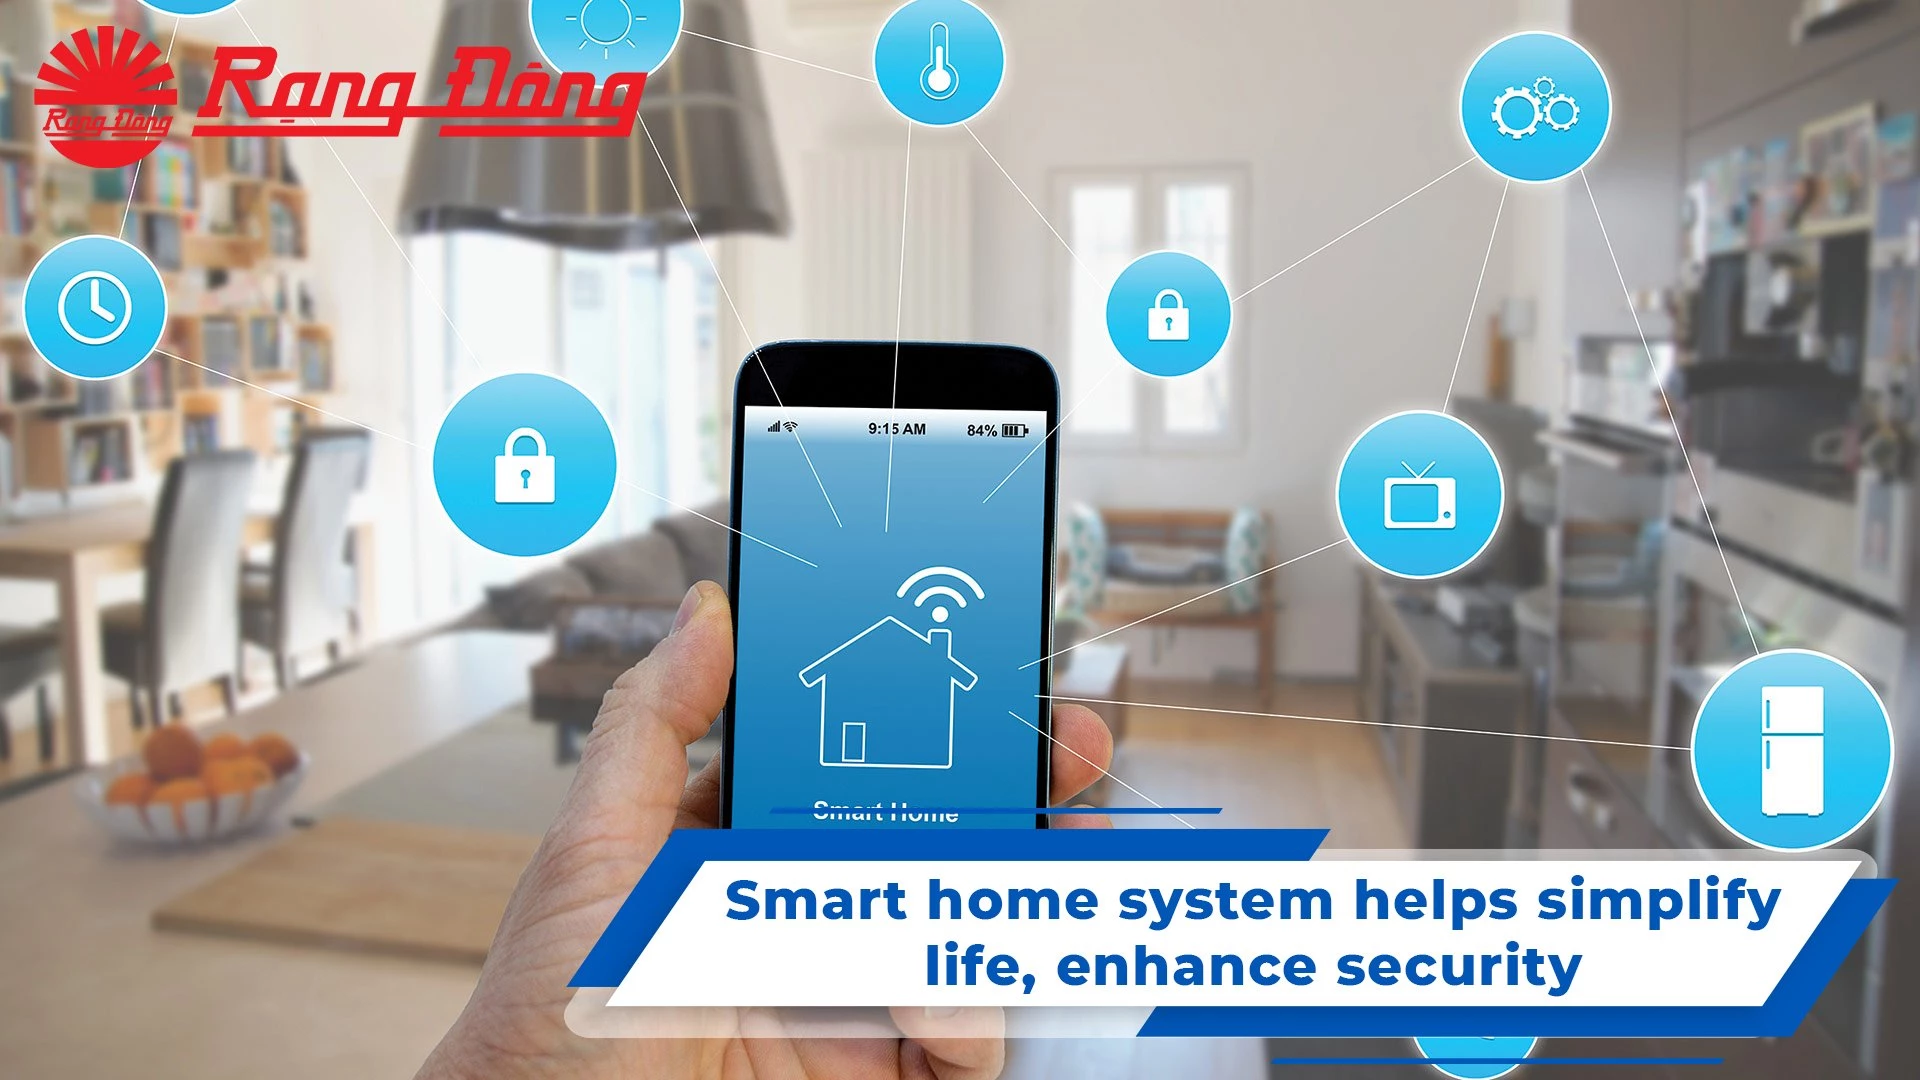 Smart home system helps simplify life, enhance security